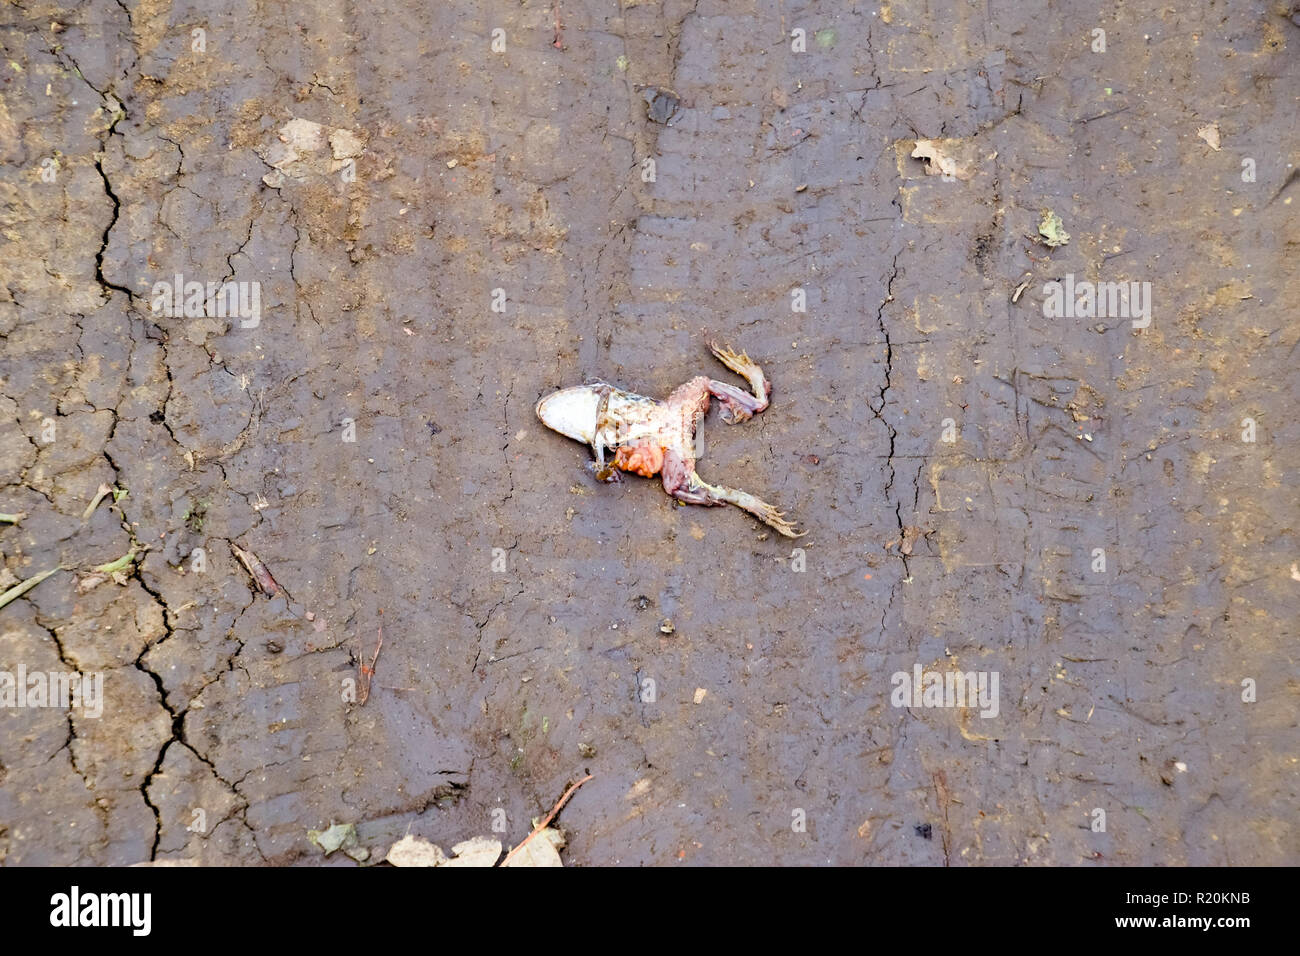 Crushed frog on the road. The death of animals on the roads. Stock Photo